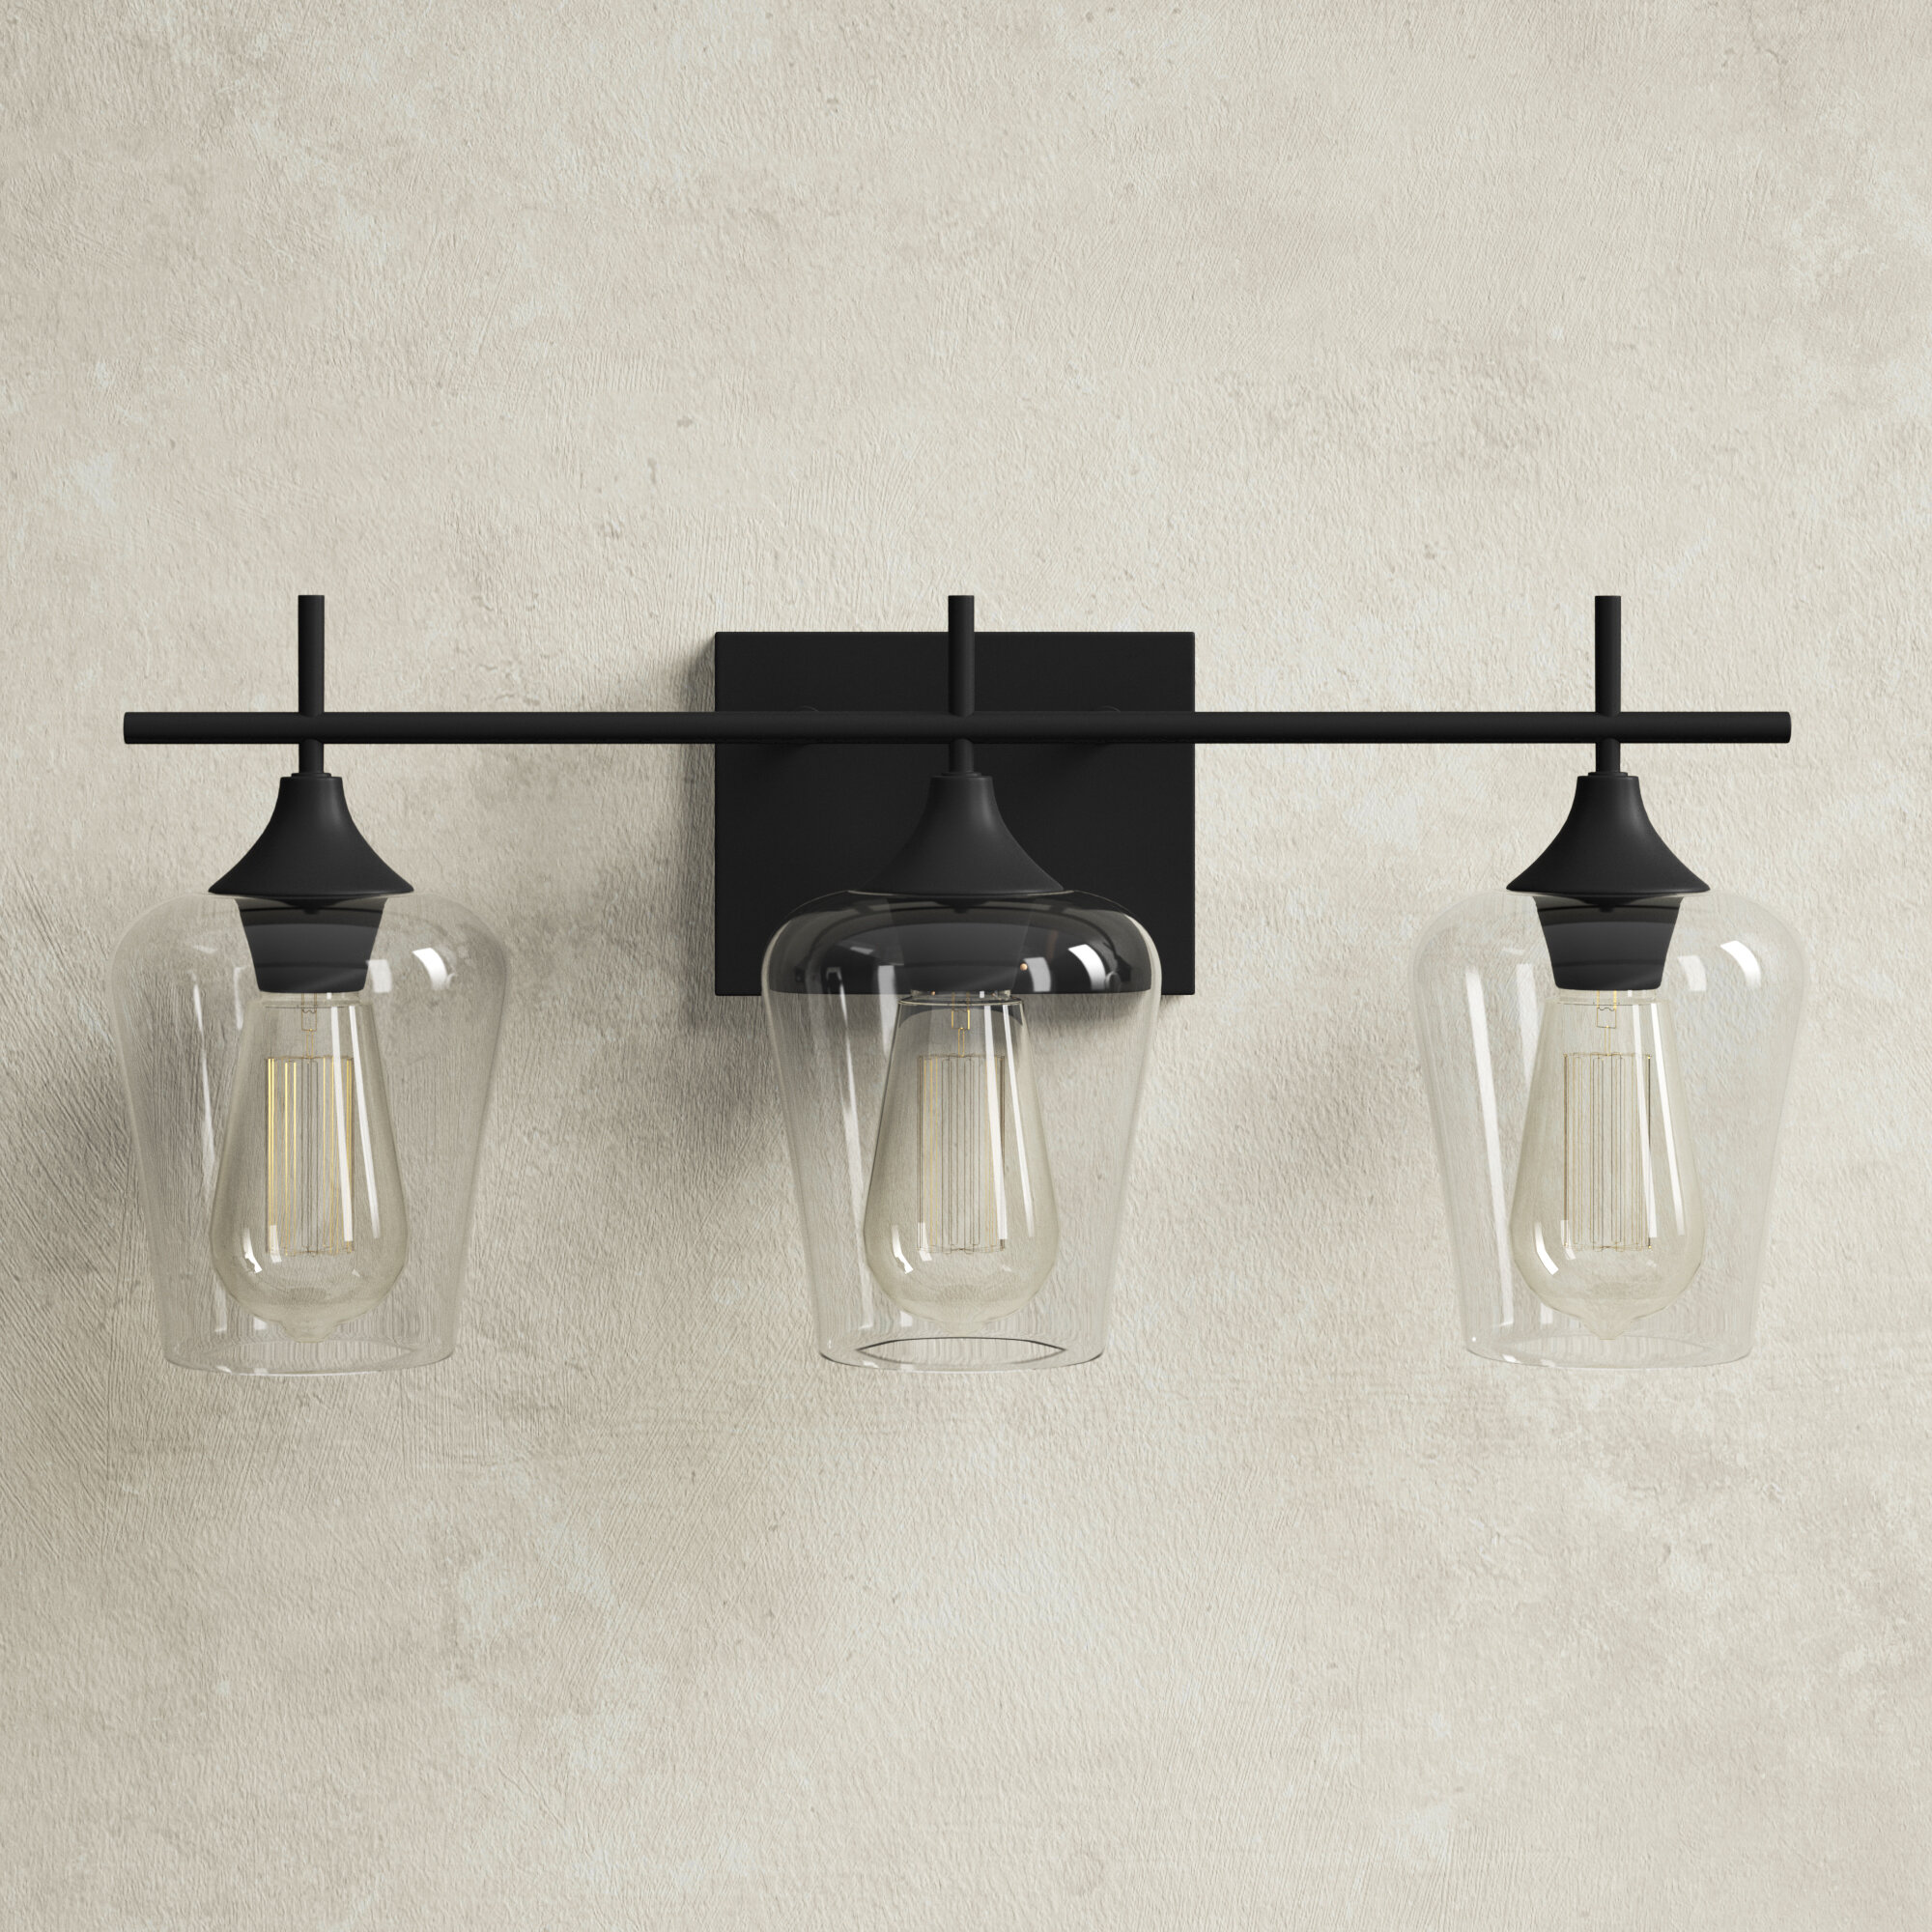 Details about  / 3-Light Wall Sconce Modern Bathroom Vanity Light Fixtures w// Clear Glass Shade